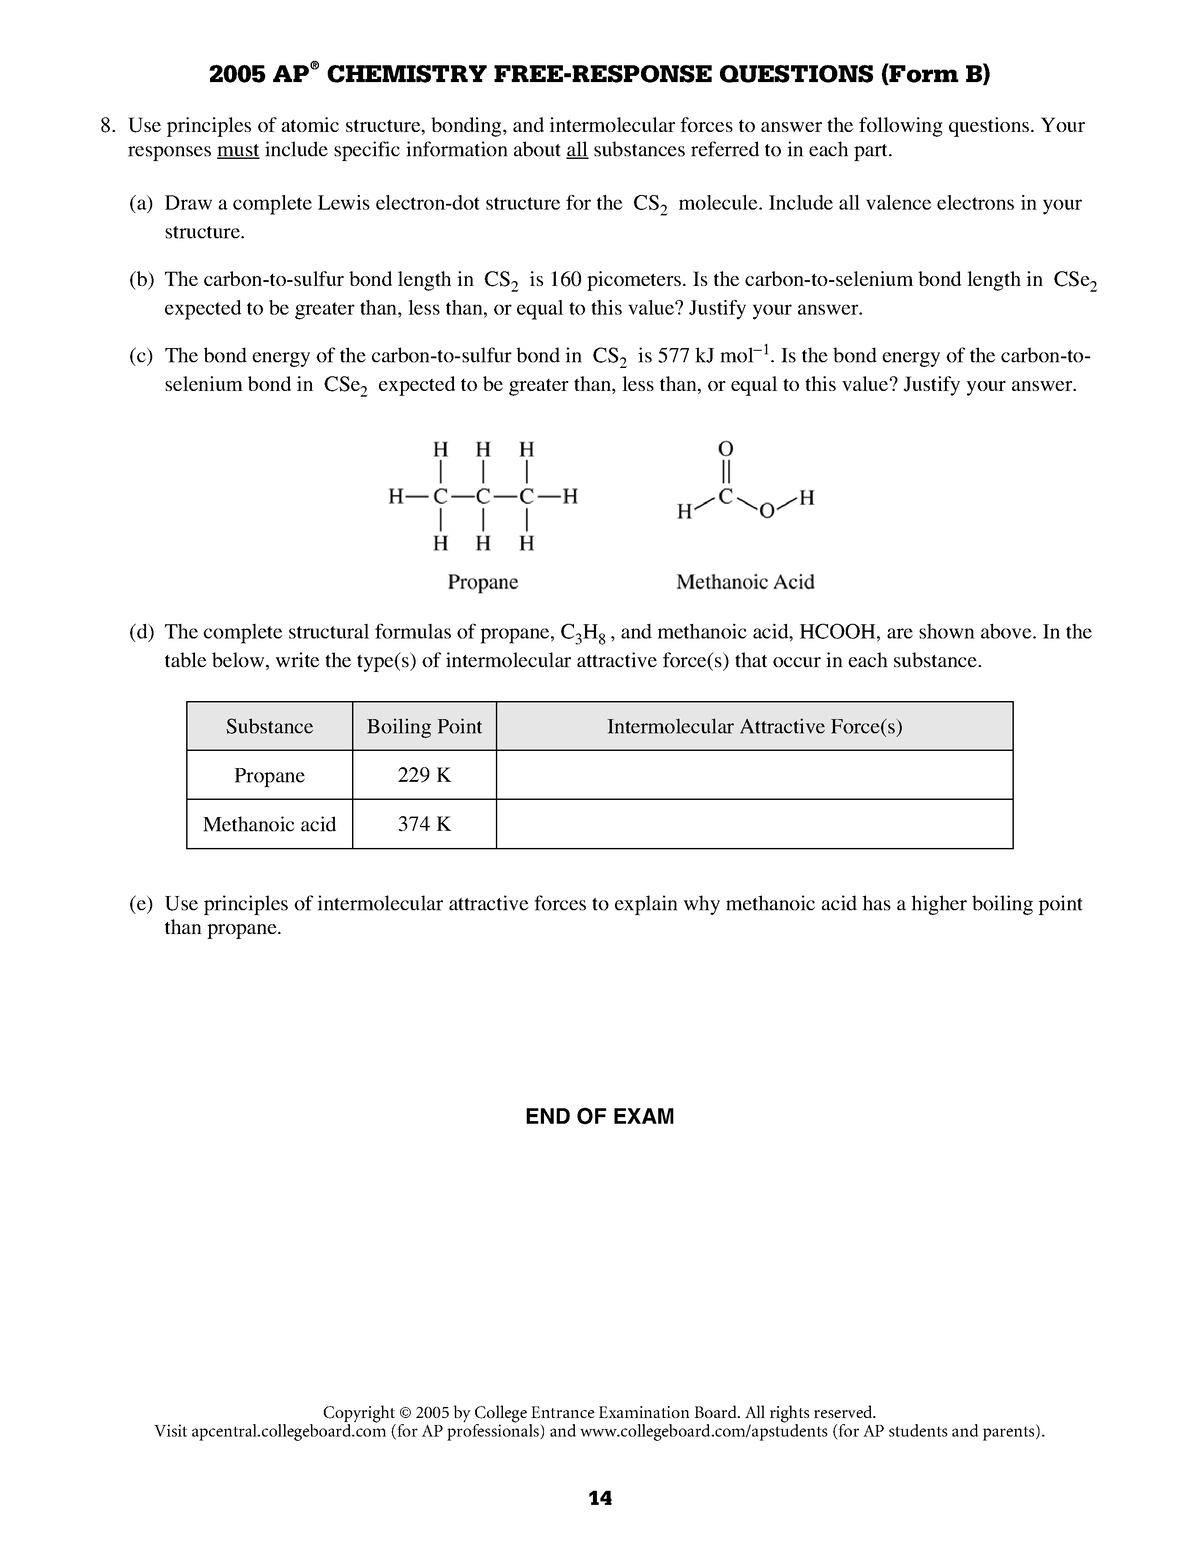 FRQ Notebook Number 1 FRQ Notebook Number 1 2005 AP ® CHEMISTRY FREE